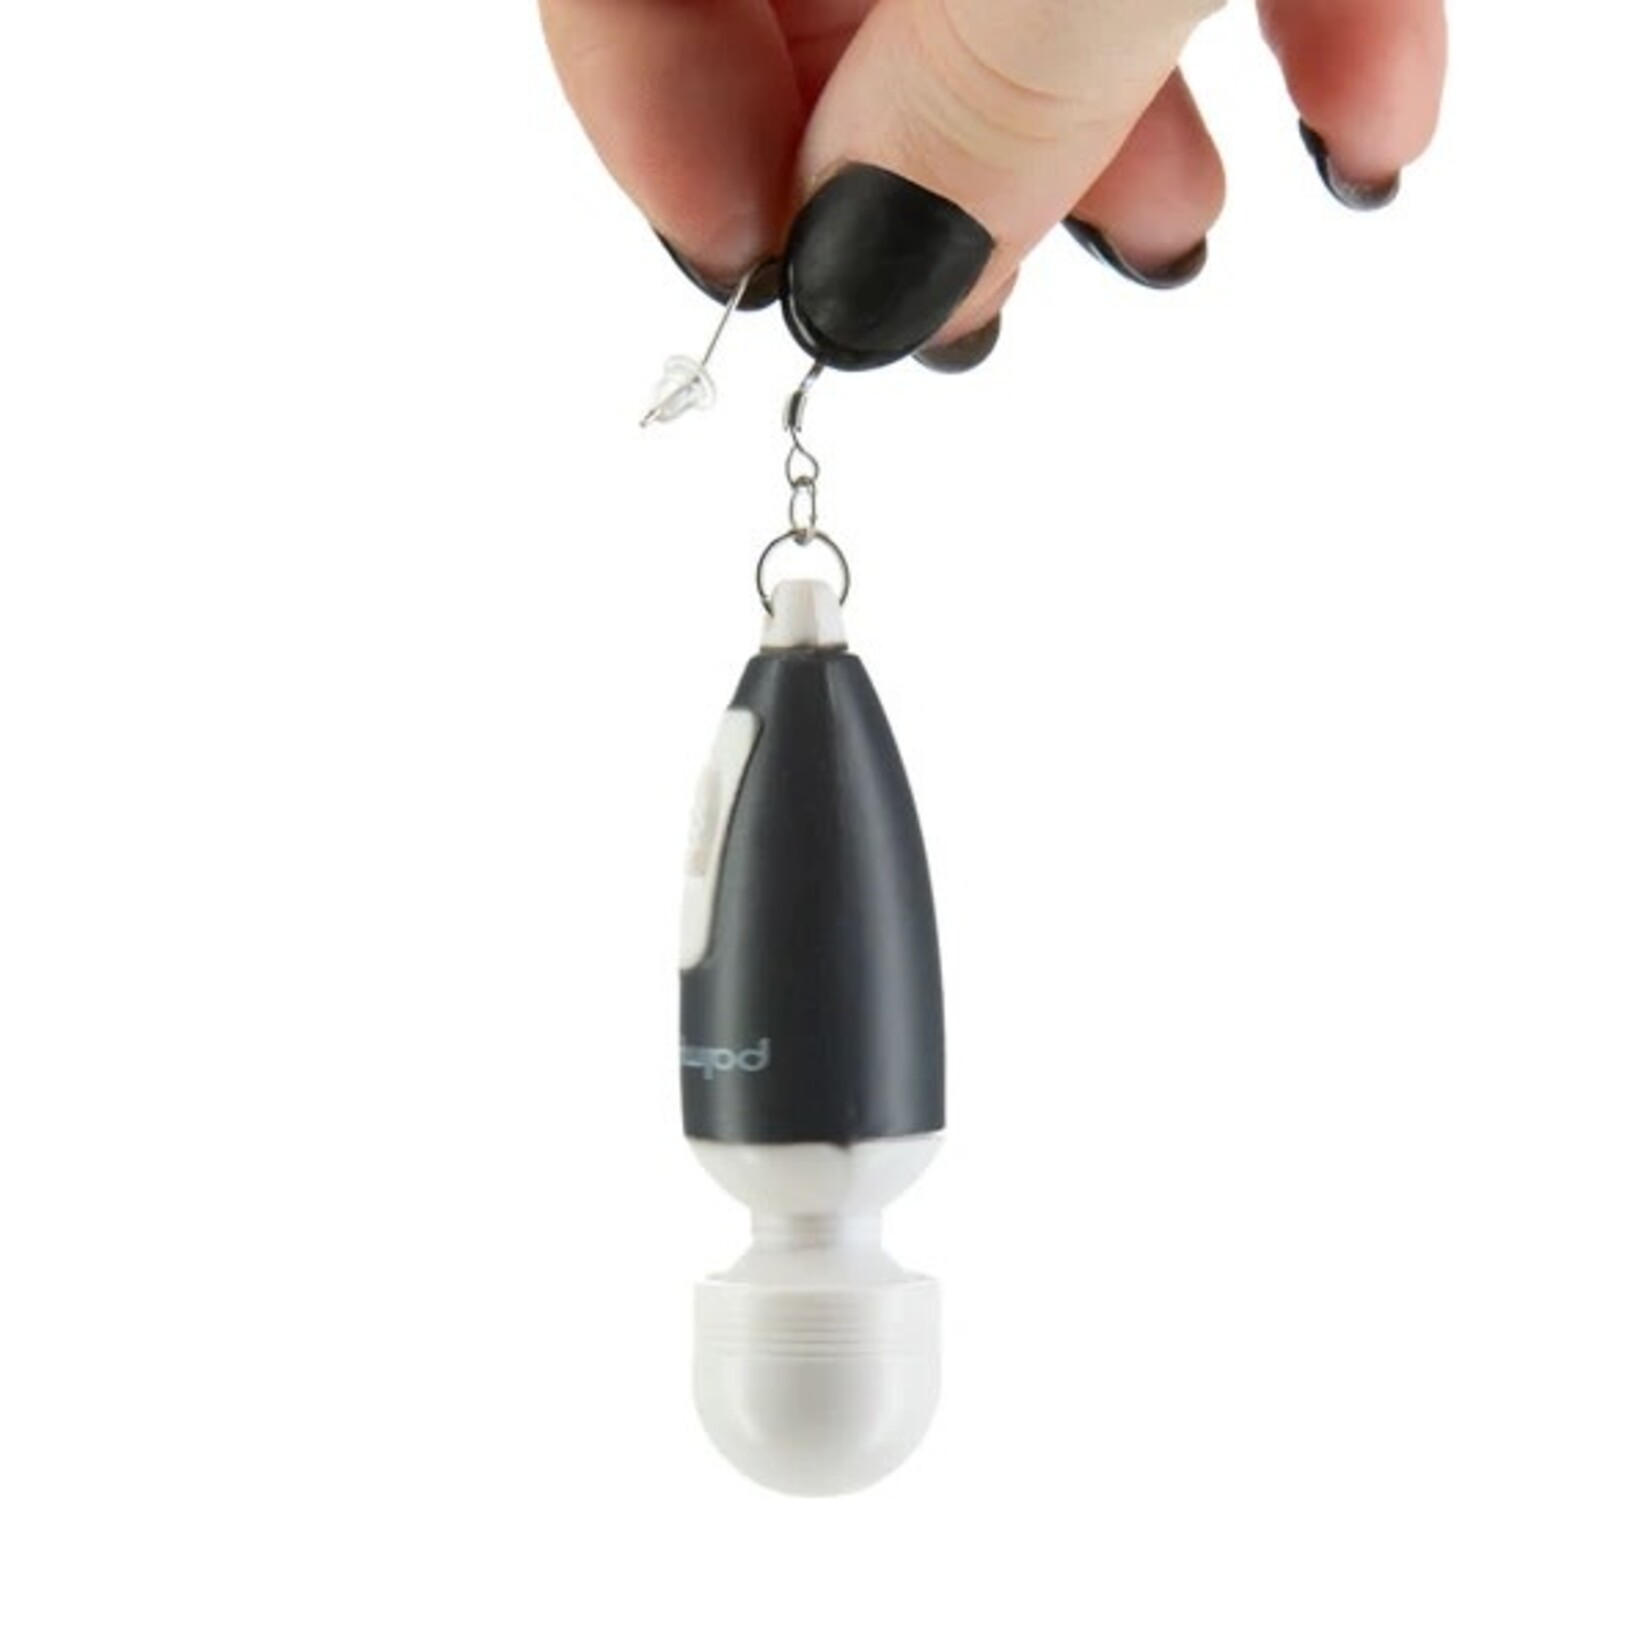 PALMPOWER - MICRO MASSAGER EARRING - 1 PIECE